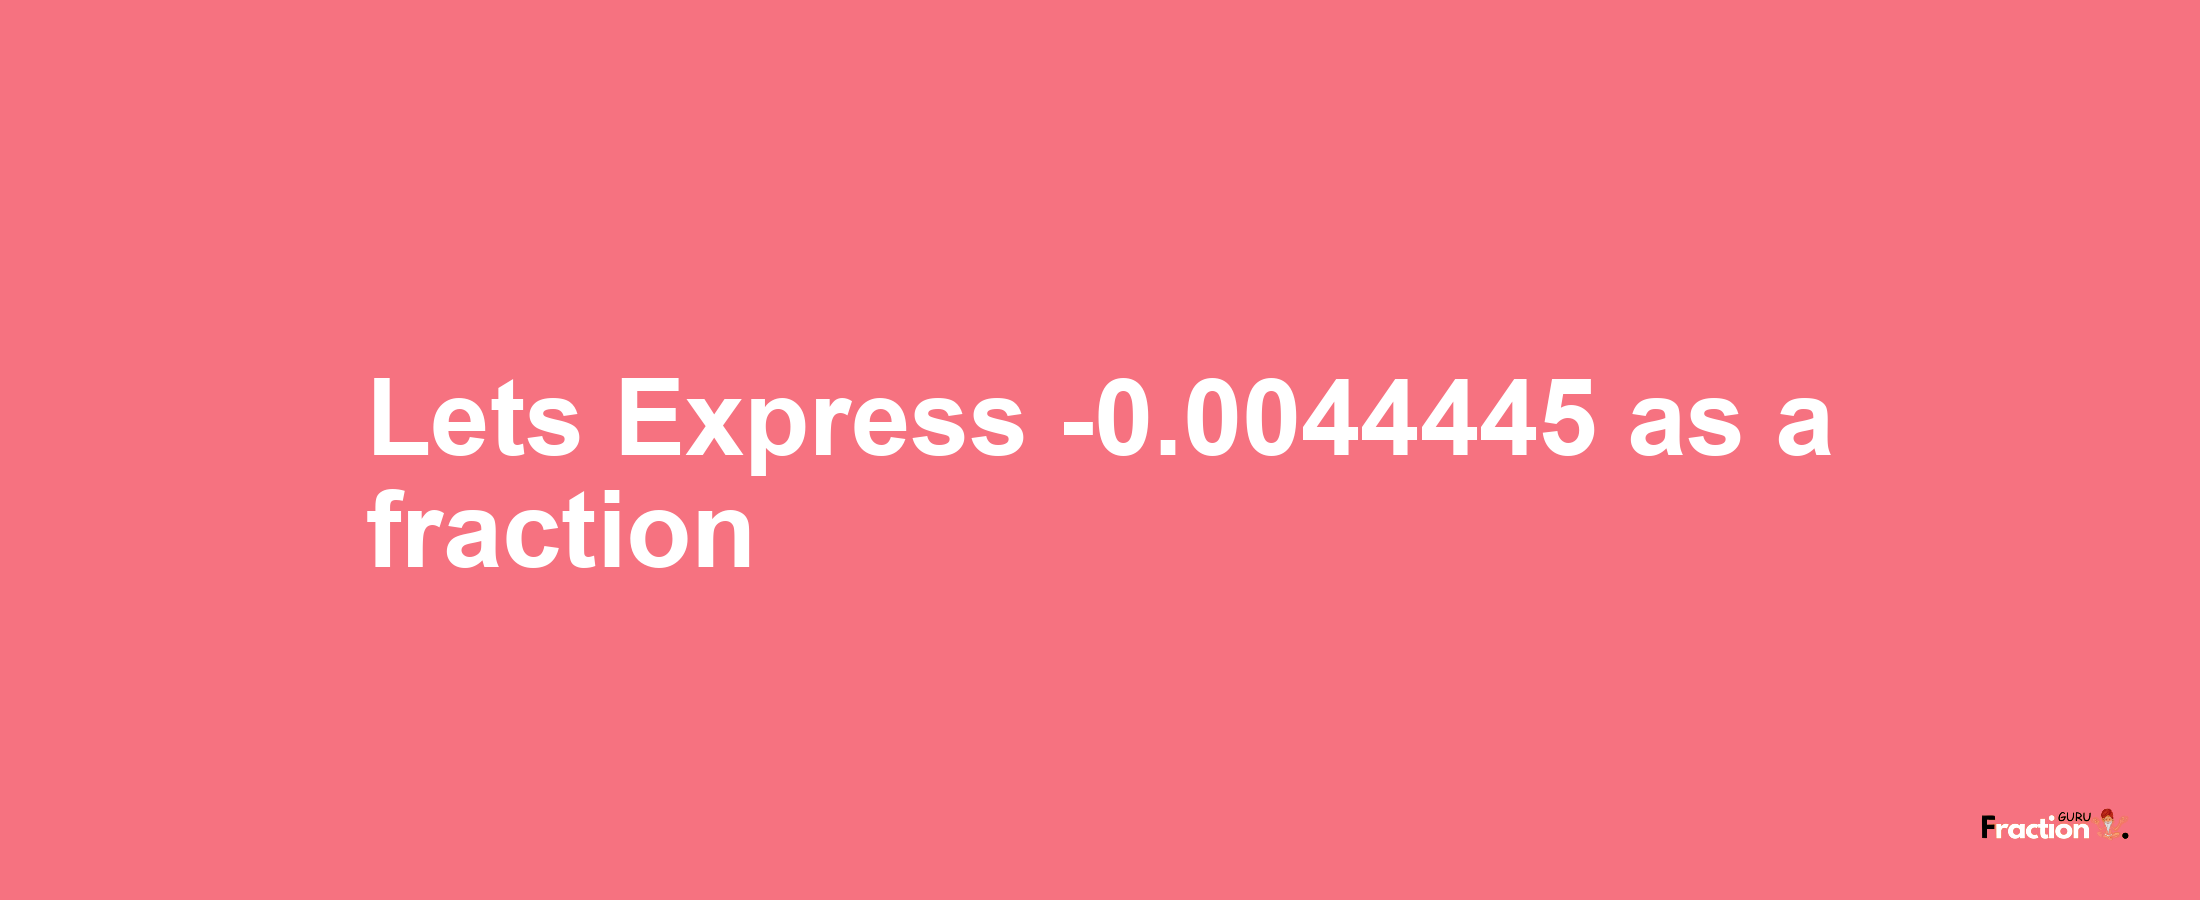 Lets Express -0.0044445 as afraction